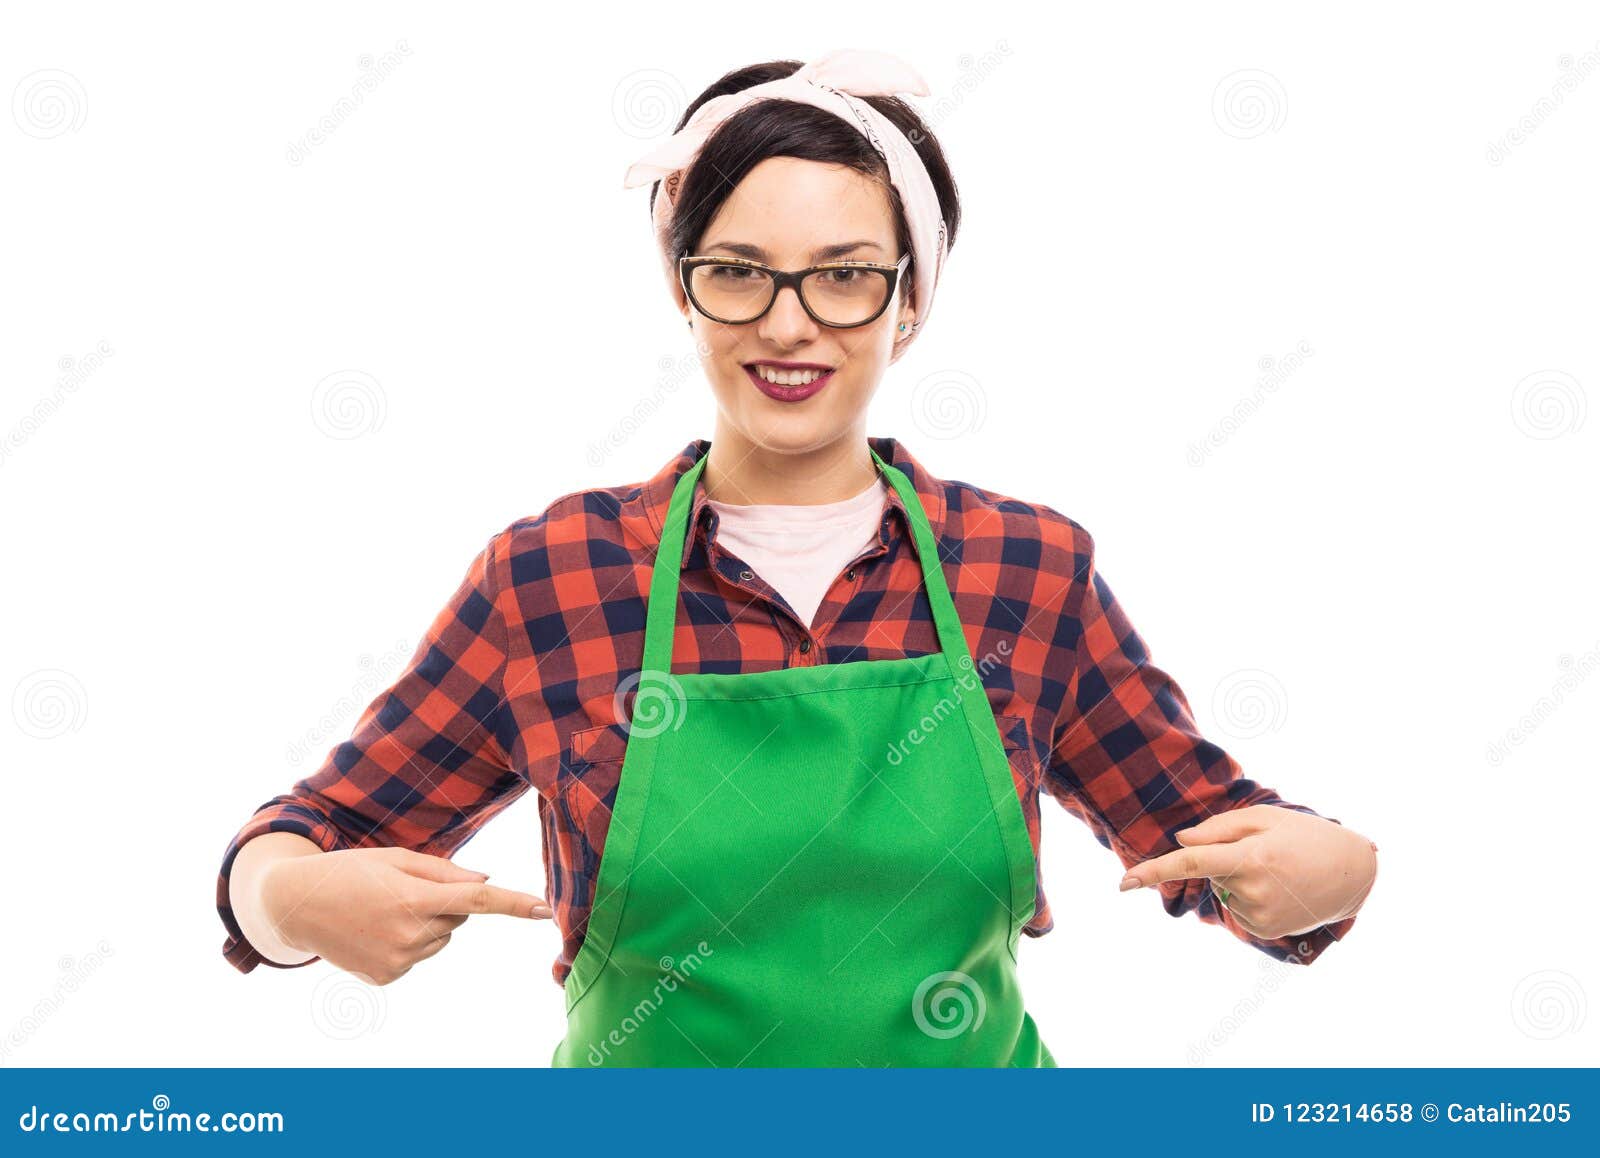 young pretty pin-up girl pointing fingers to green apron